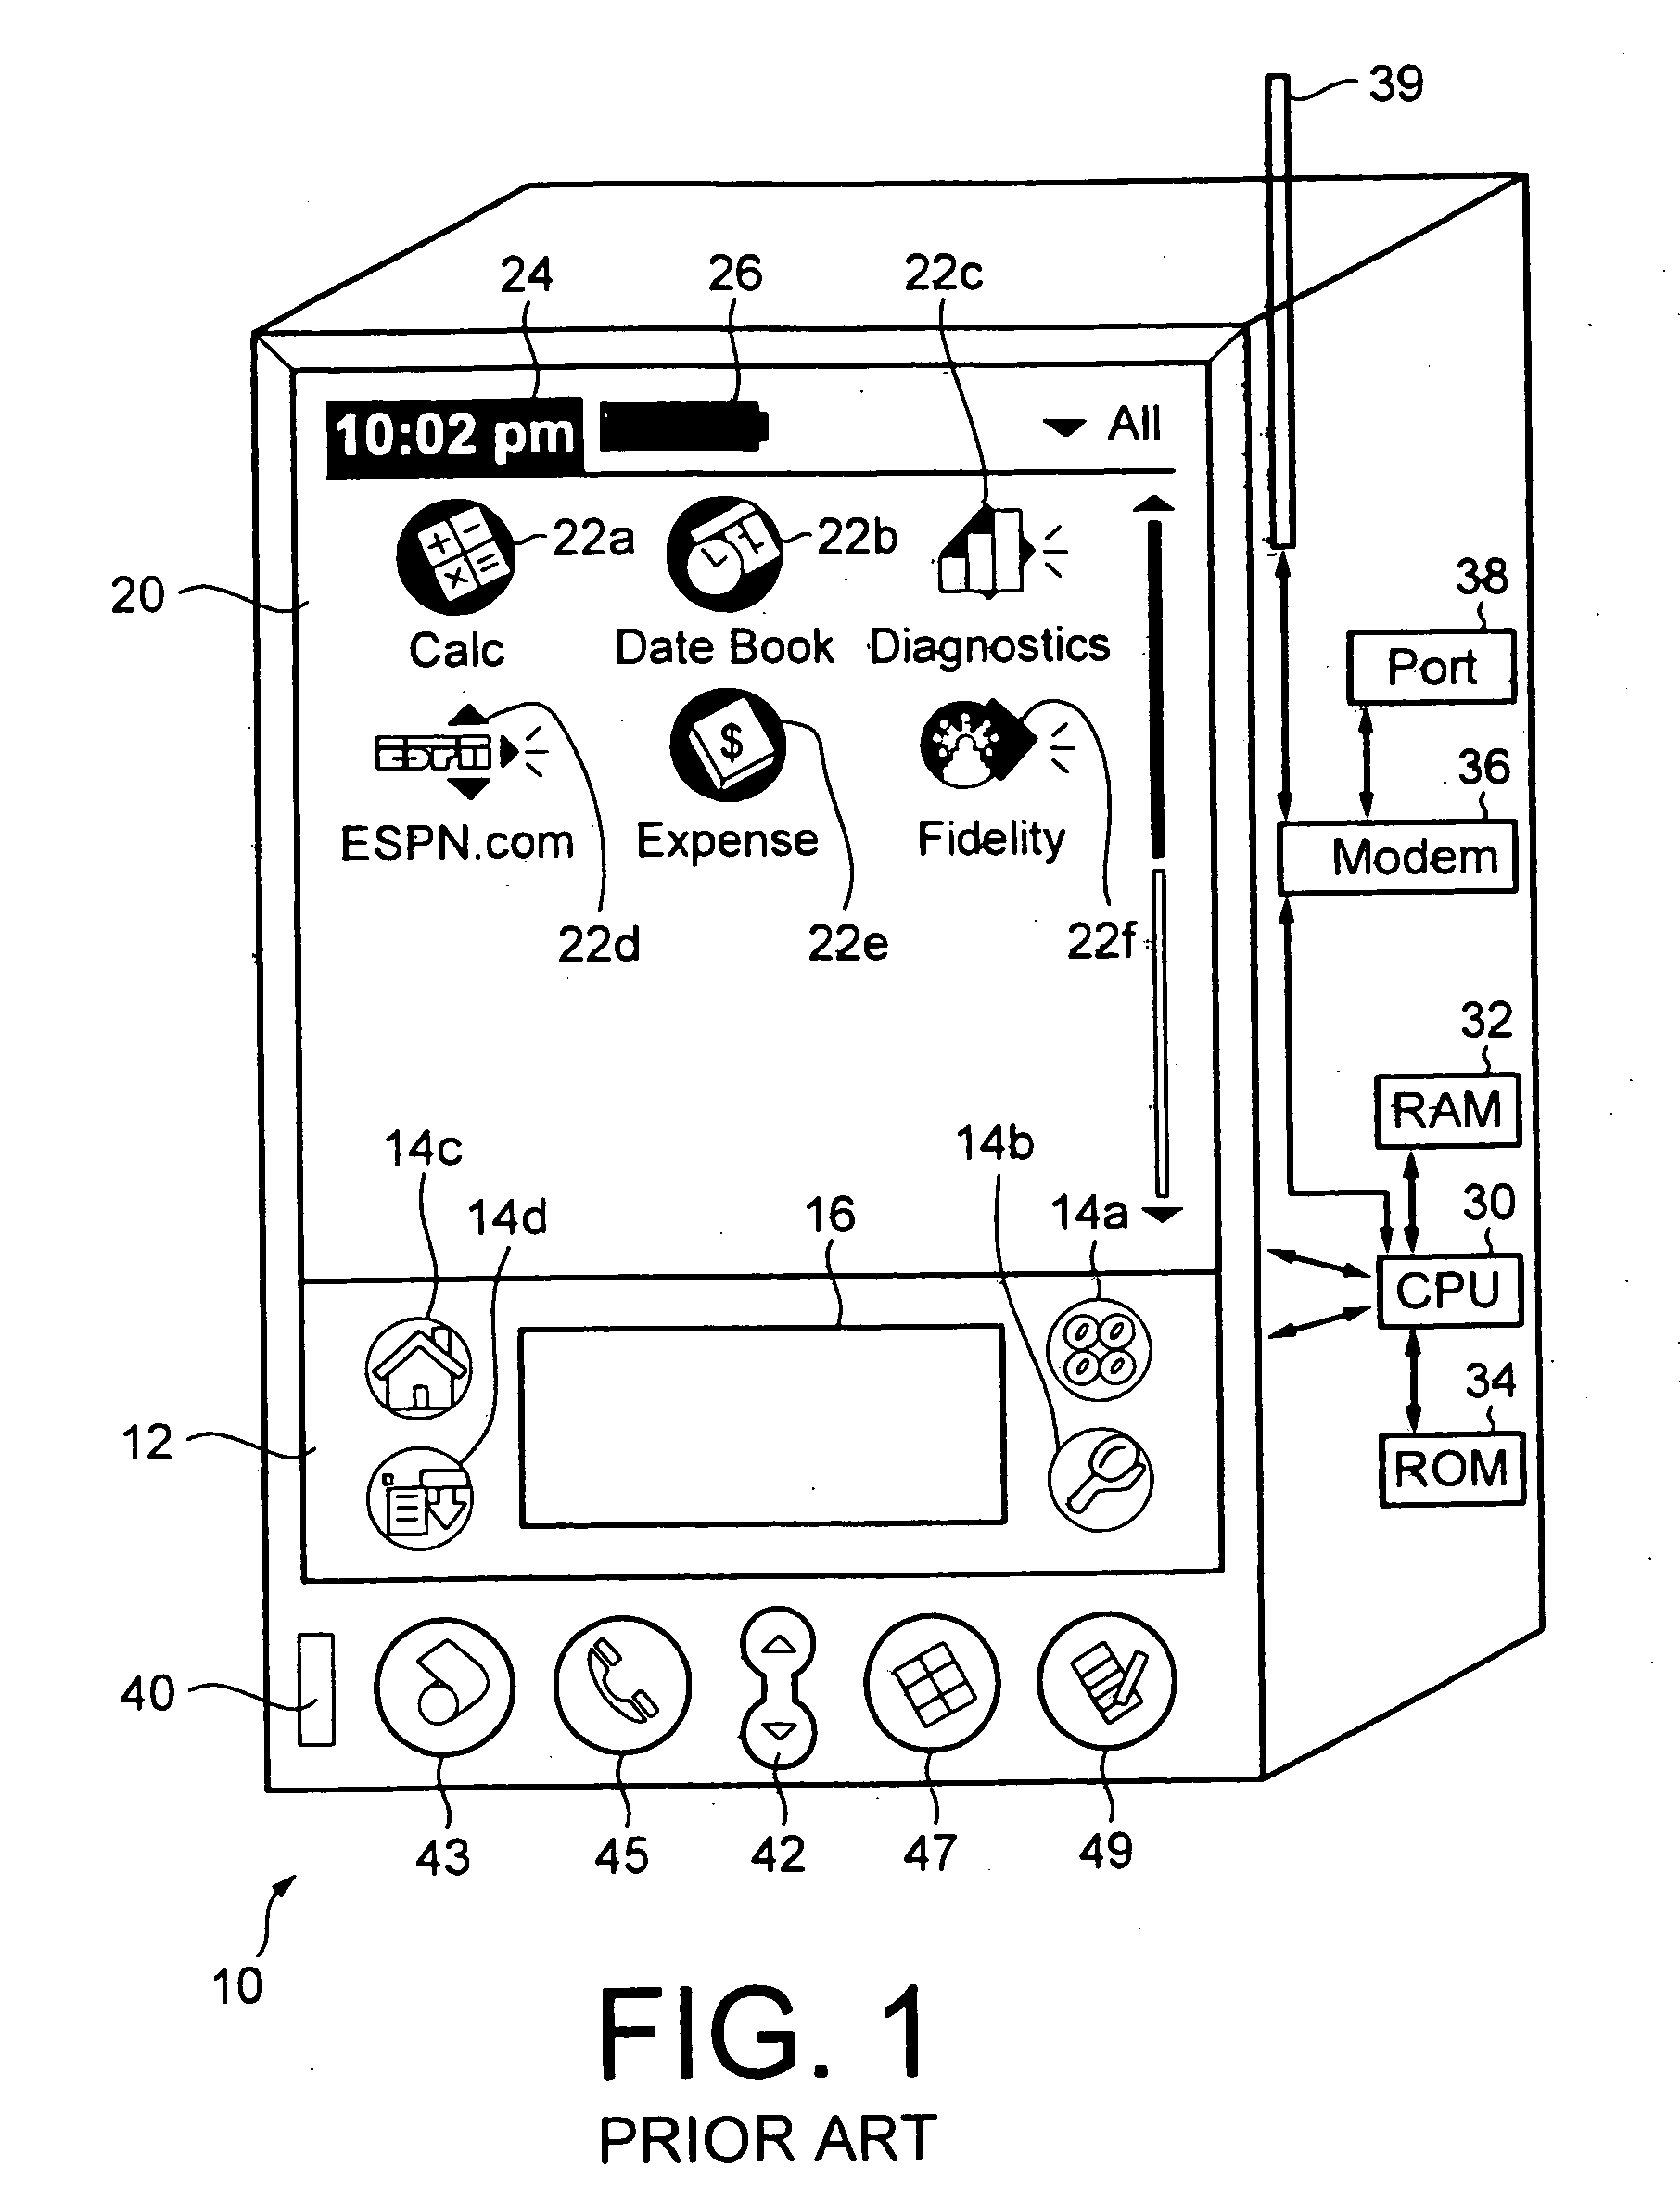 Computer device, method and article of manufacture for utilizing sequenced symbols to enable programmed applications and commands